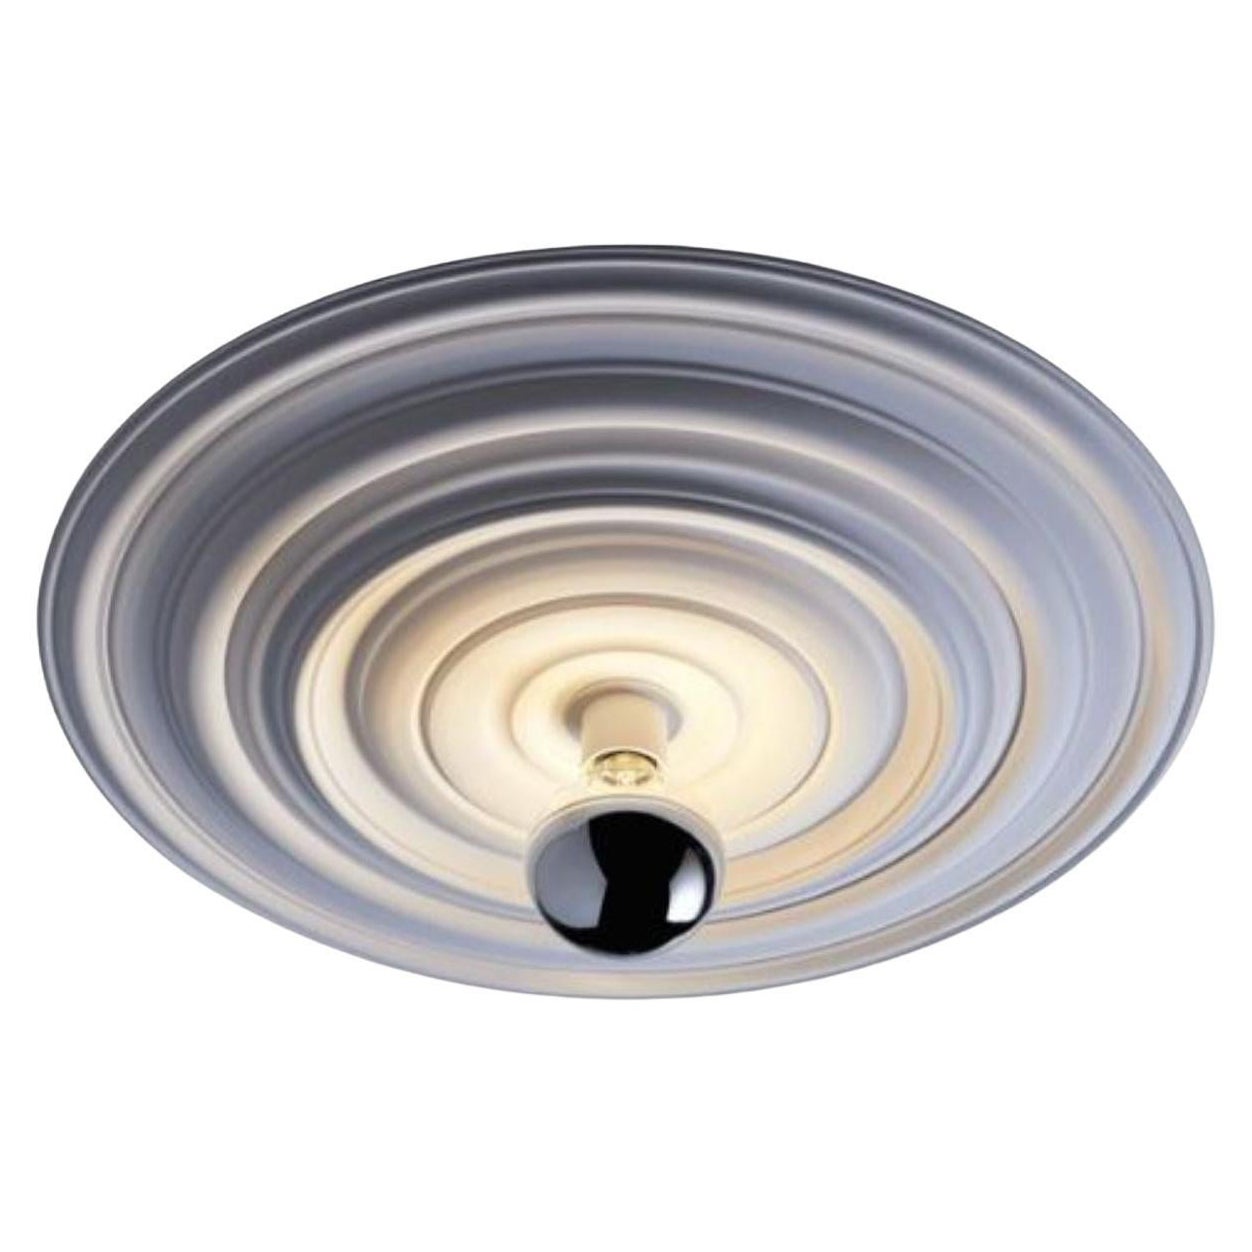 Small Odeon Ceiling Light by Radar For Sale